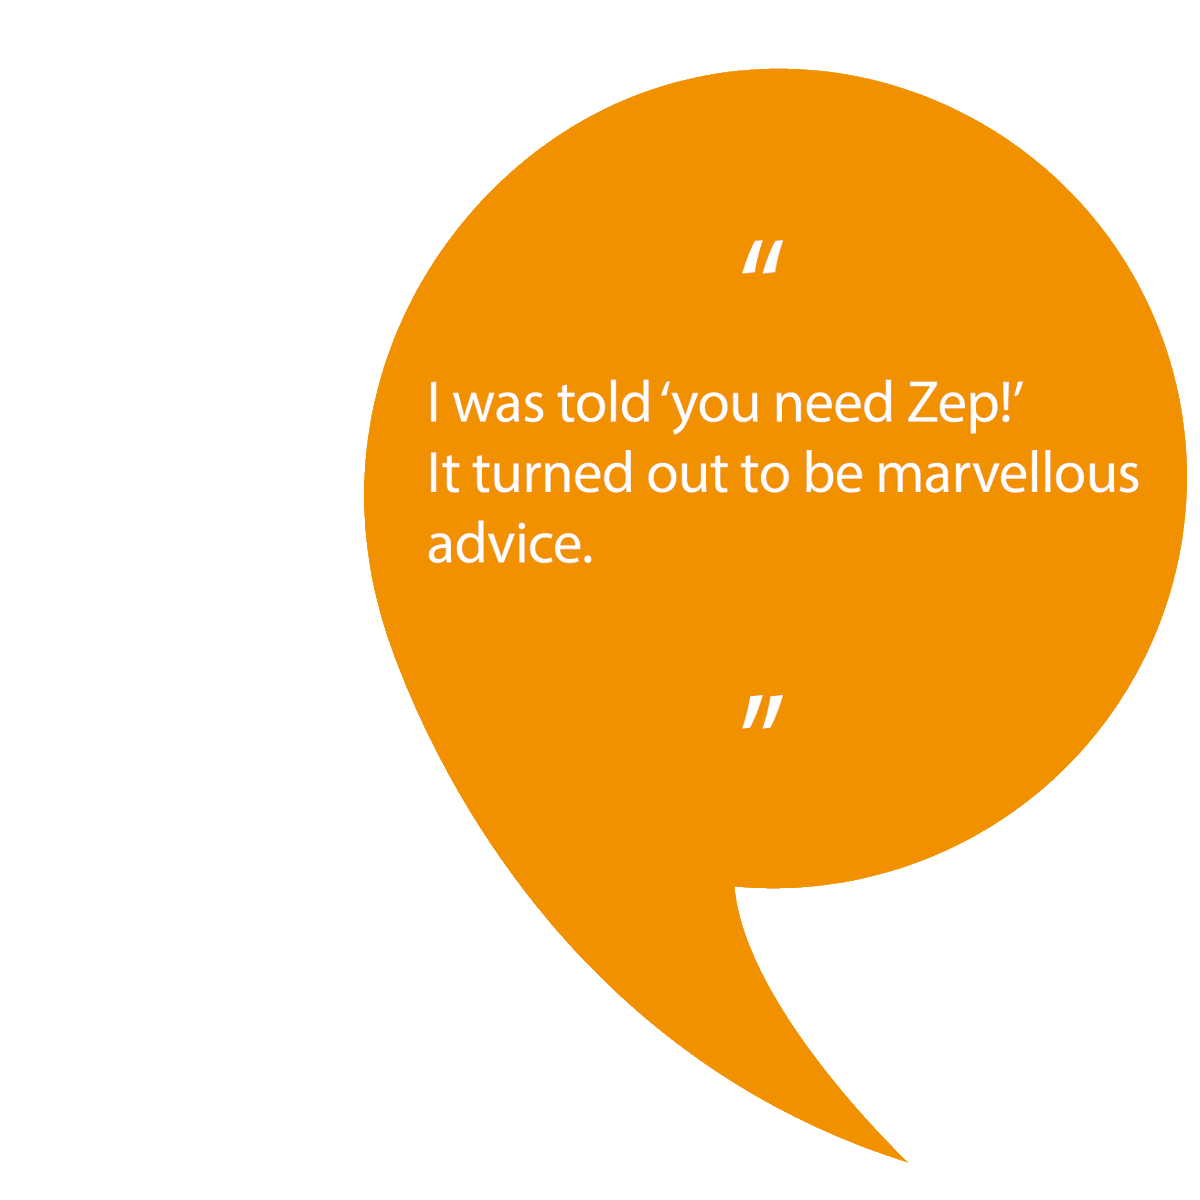 Another satisfied client says...

I was told 'you need Zep'. It turned out to be marvellous advice.

Read more here: bellavia-associates.com/testimonials

#PortHour